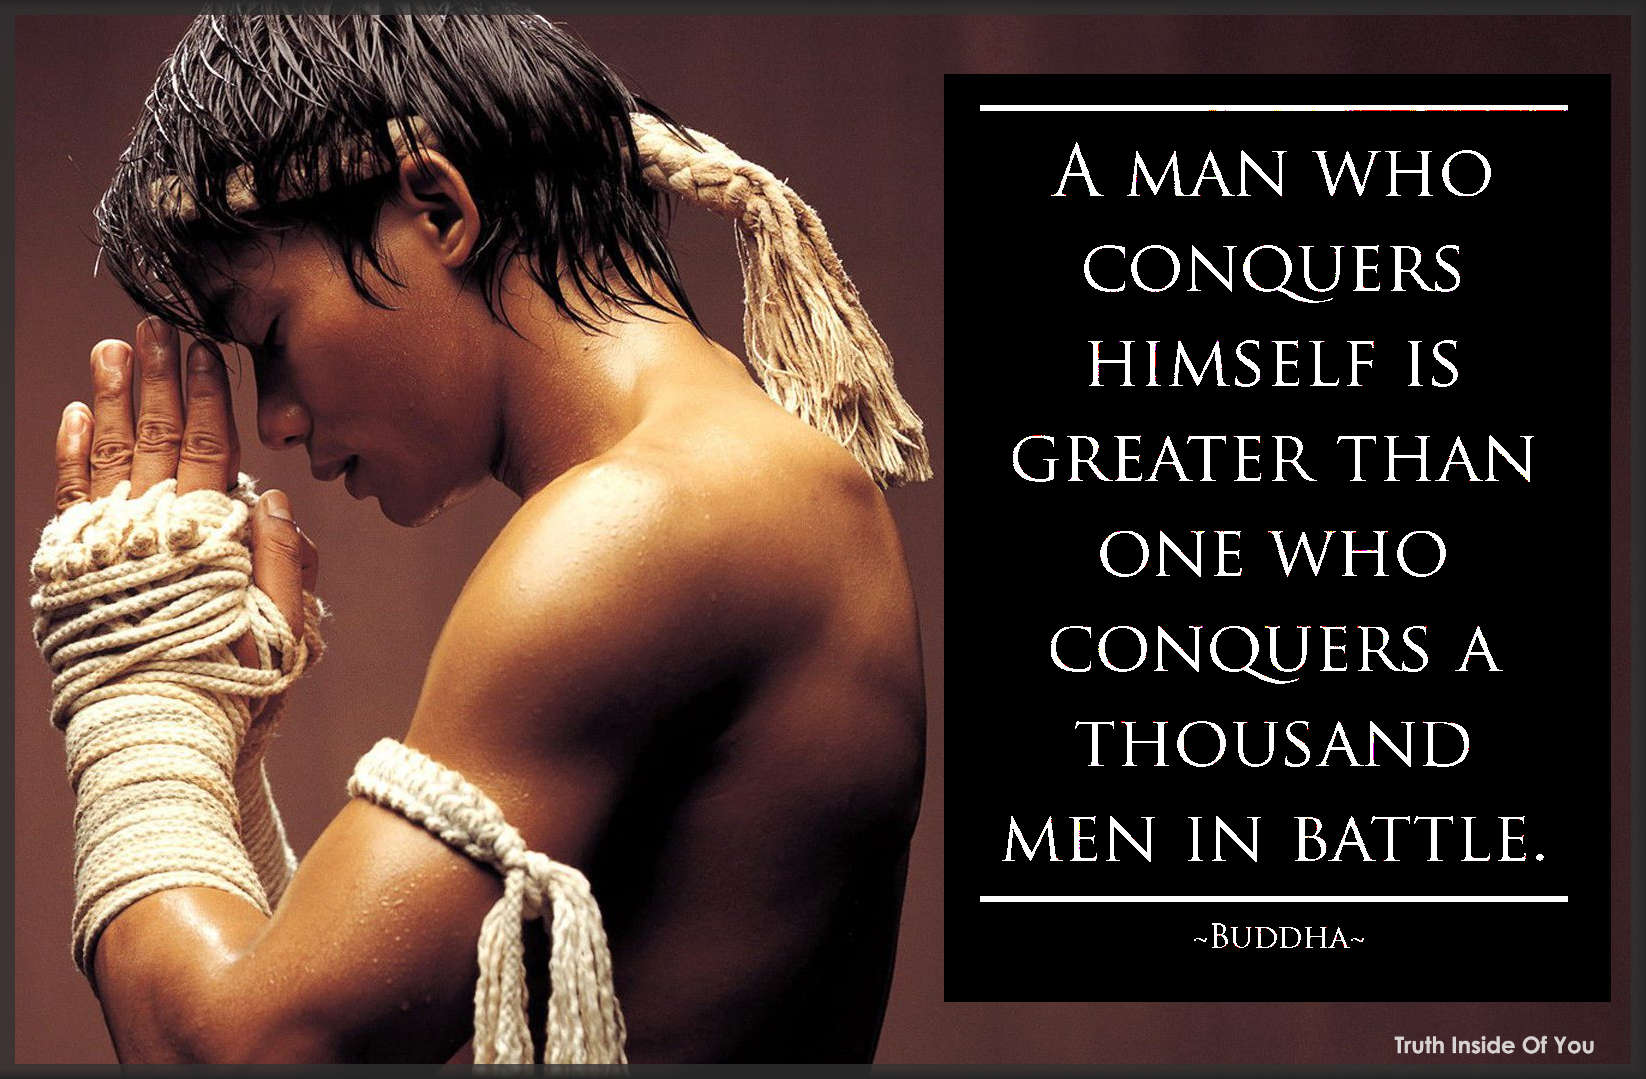 A man who conquers himself is greater than one who conquers a thousand men in battle. ~ Buddha